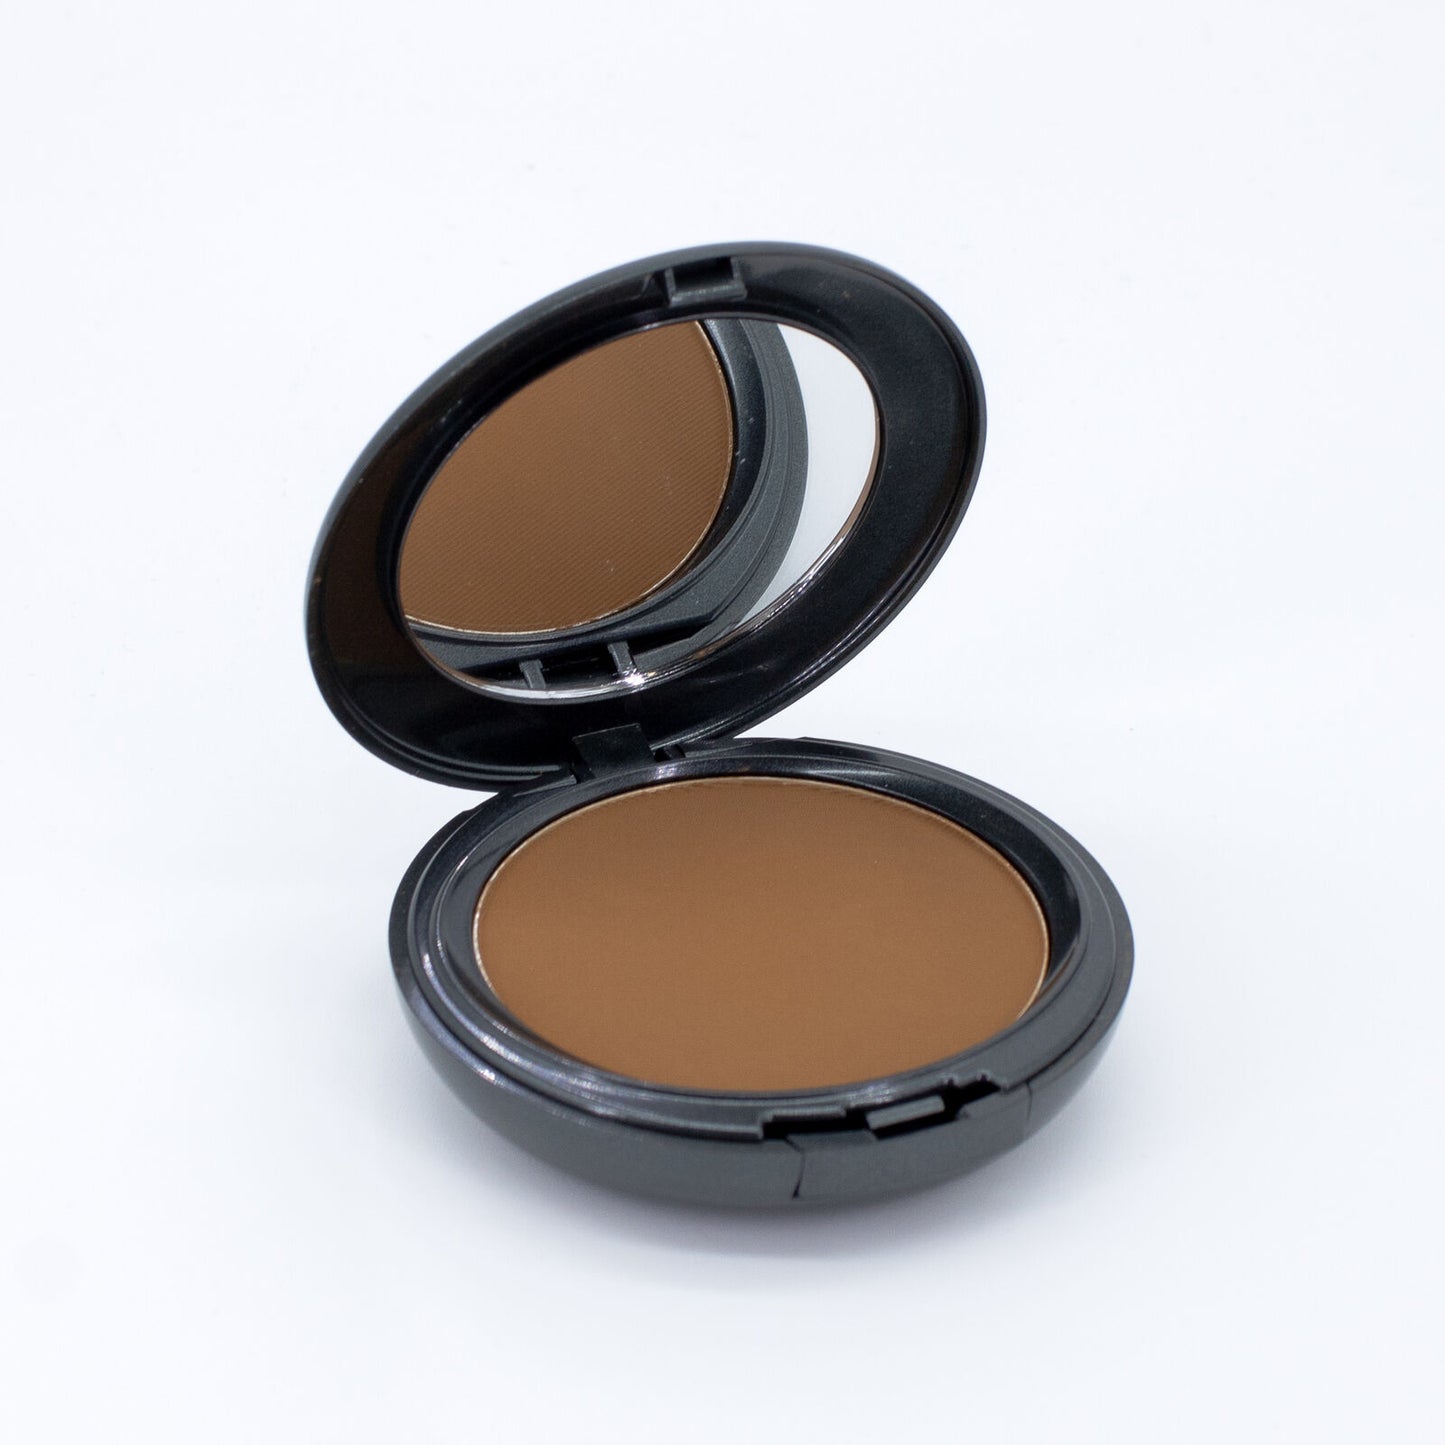 COVER FX Pressed Mineral Foundation G110 .42oz - Imperfect Box